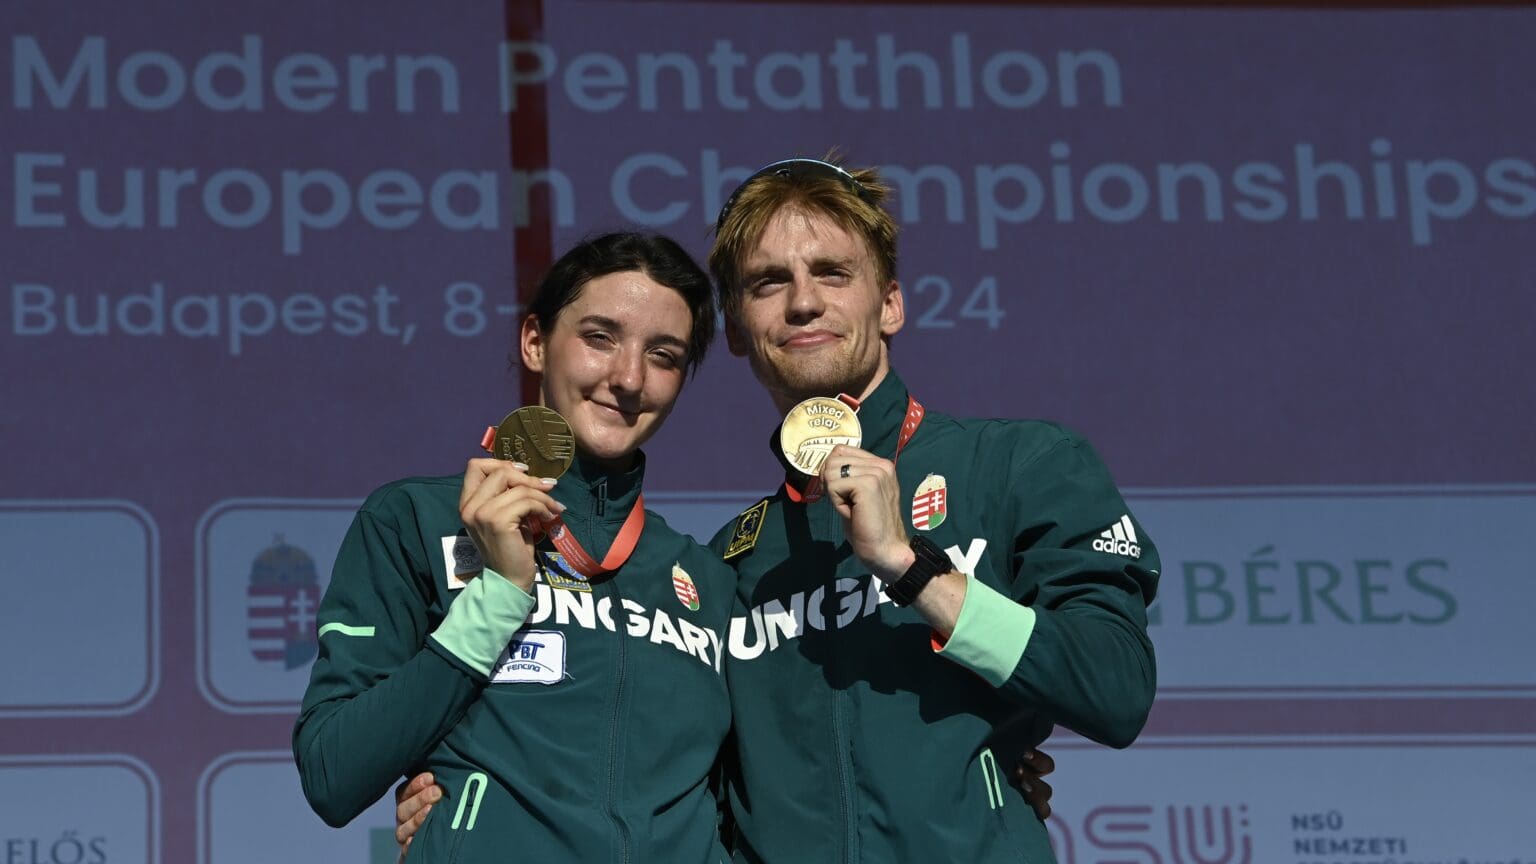 Hungarian Mixed Relay Team Clinches Gold from Last Place at Pentathlon Euros